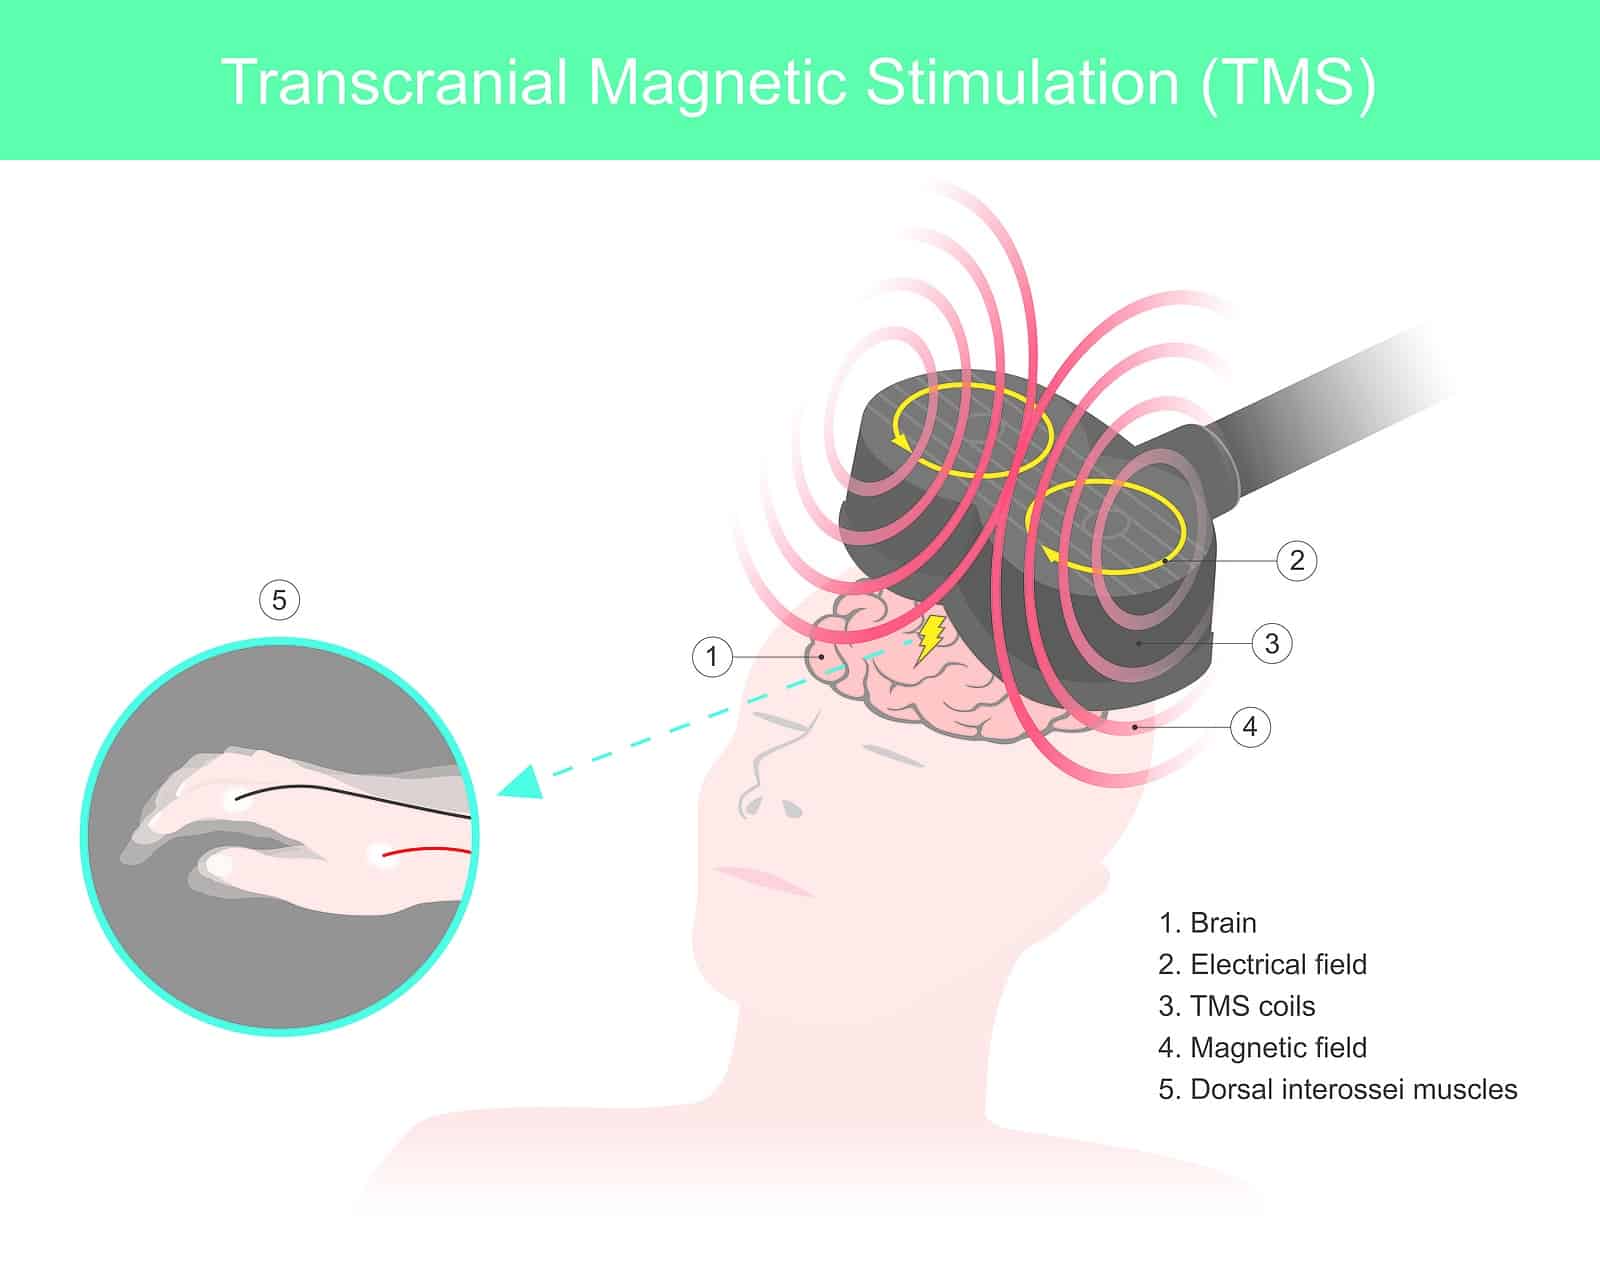 How Does TMS Therapy Work?